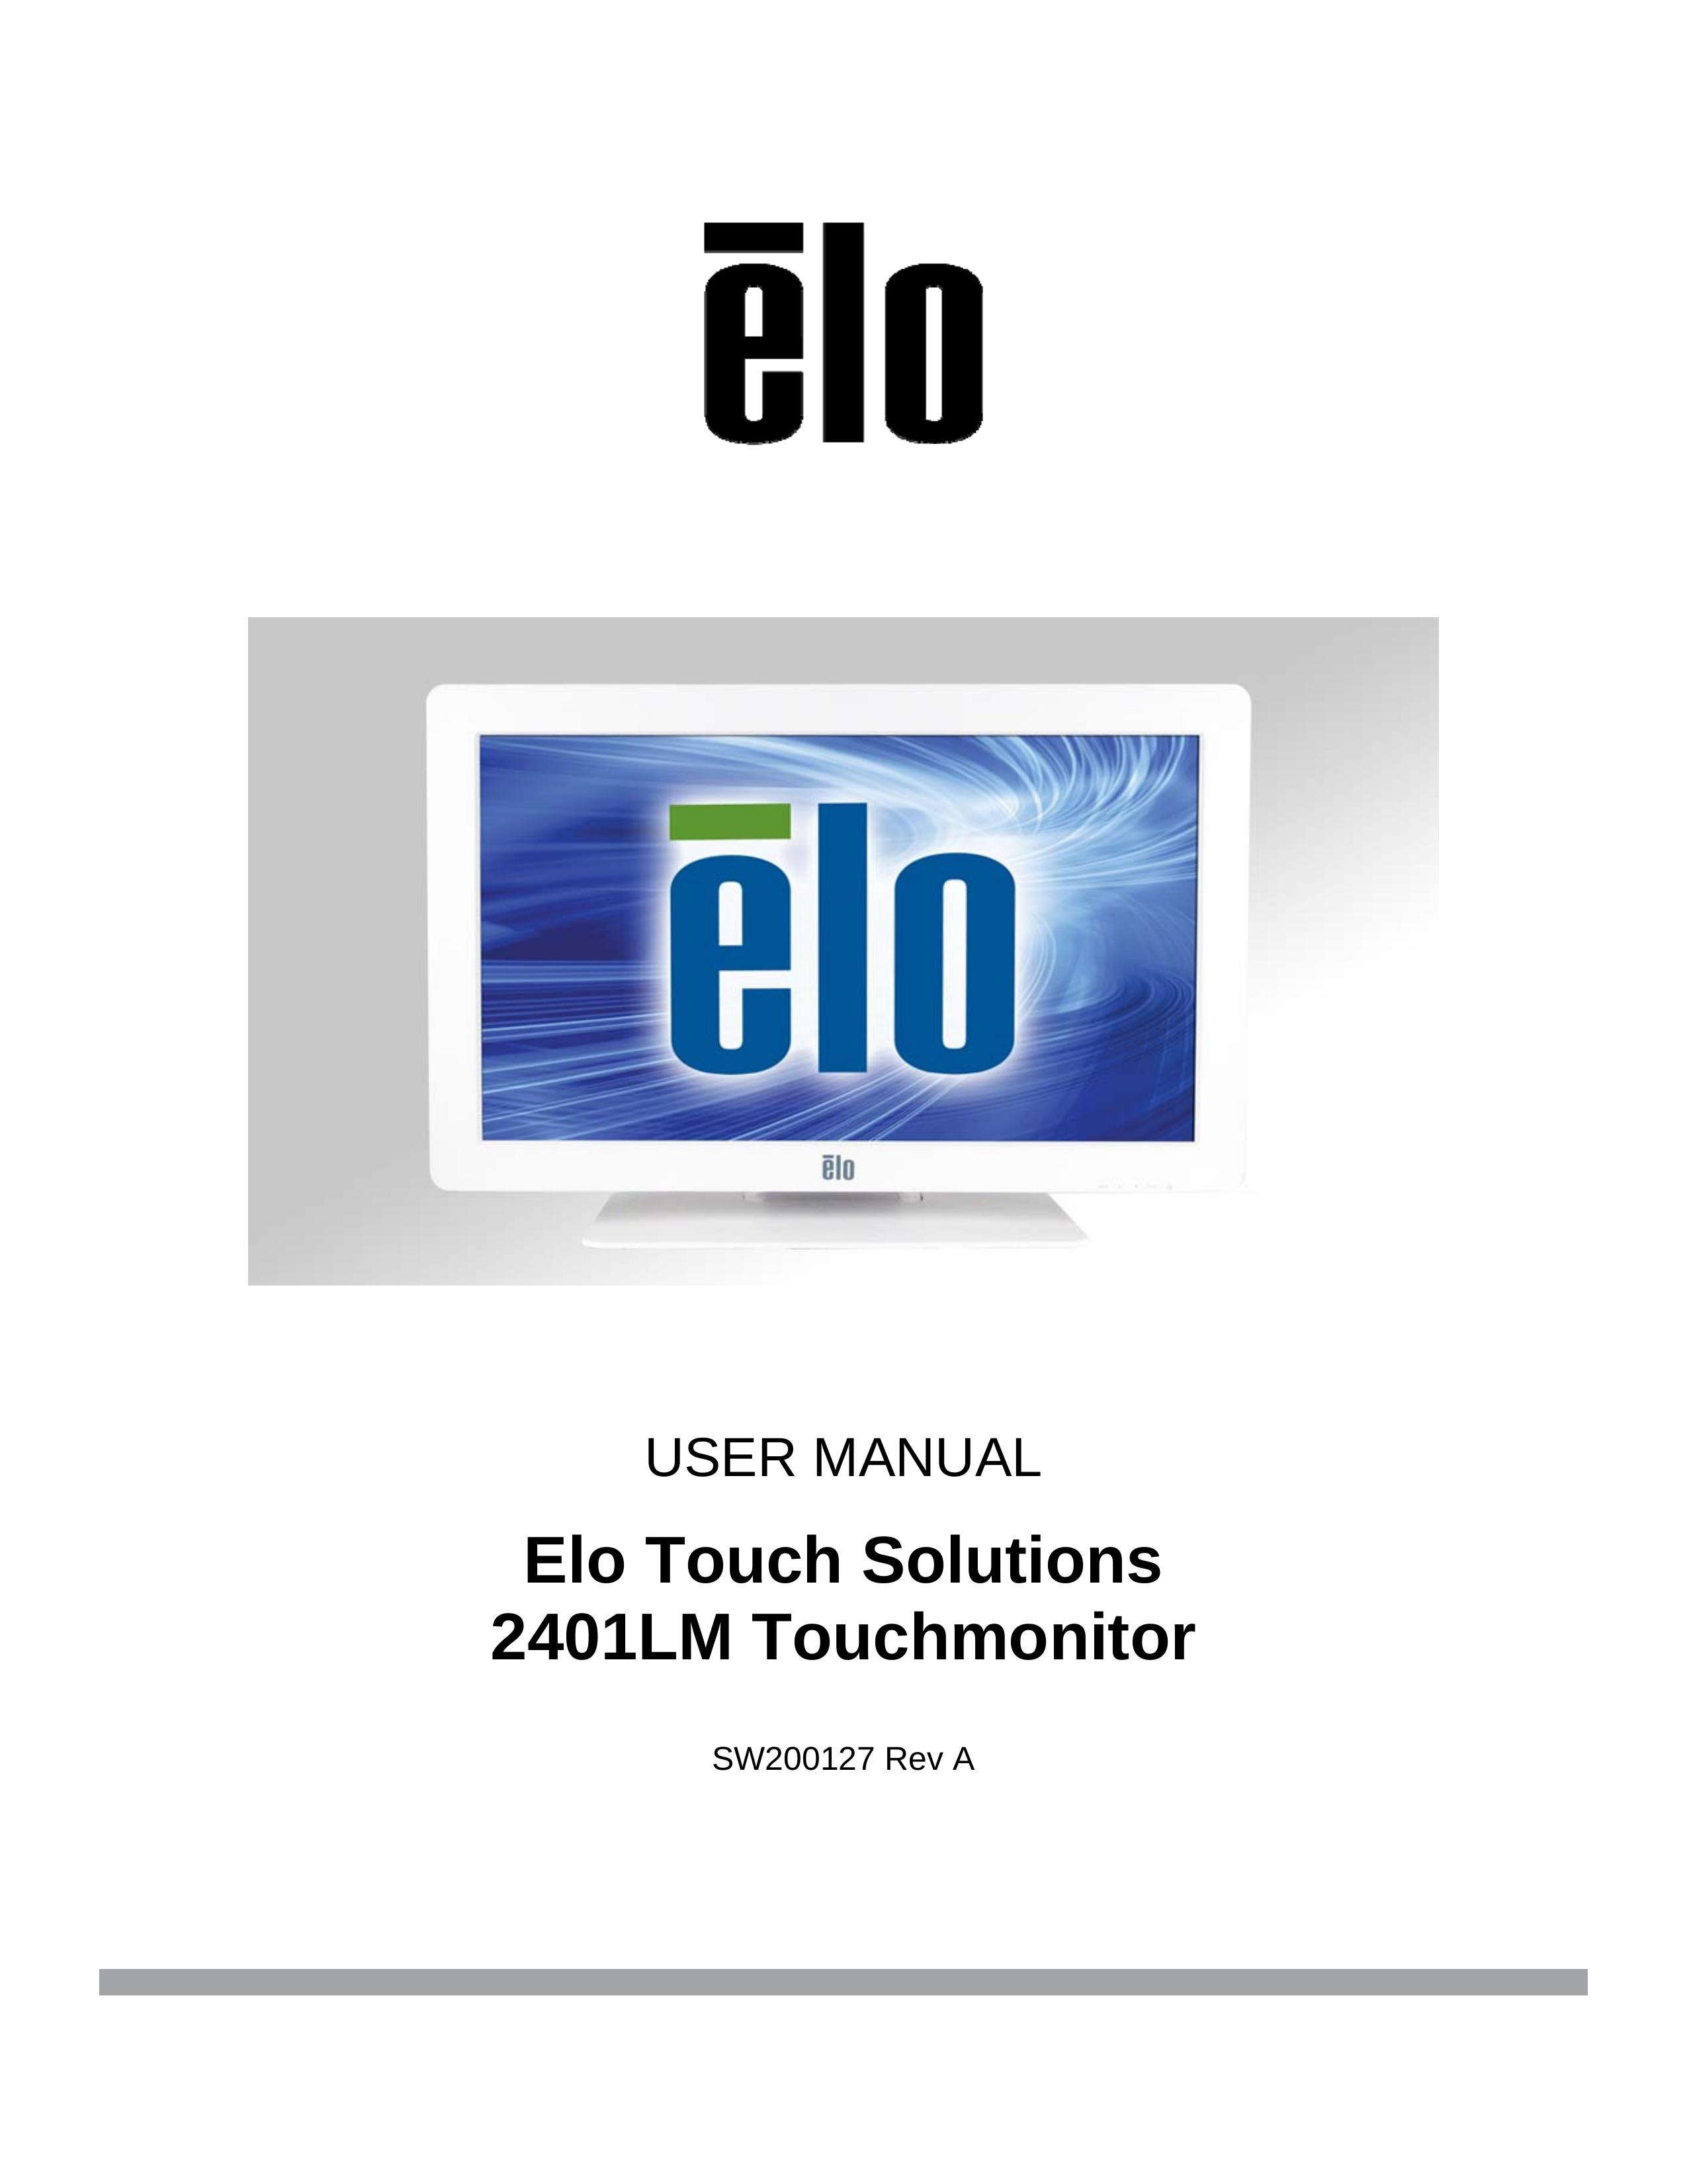 Elo TouchSystems 2401LM Blood Glucose Meter User Manual (Page 1)